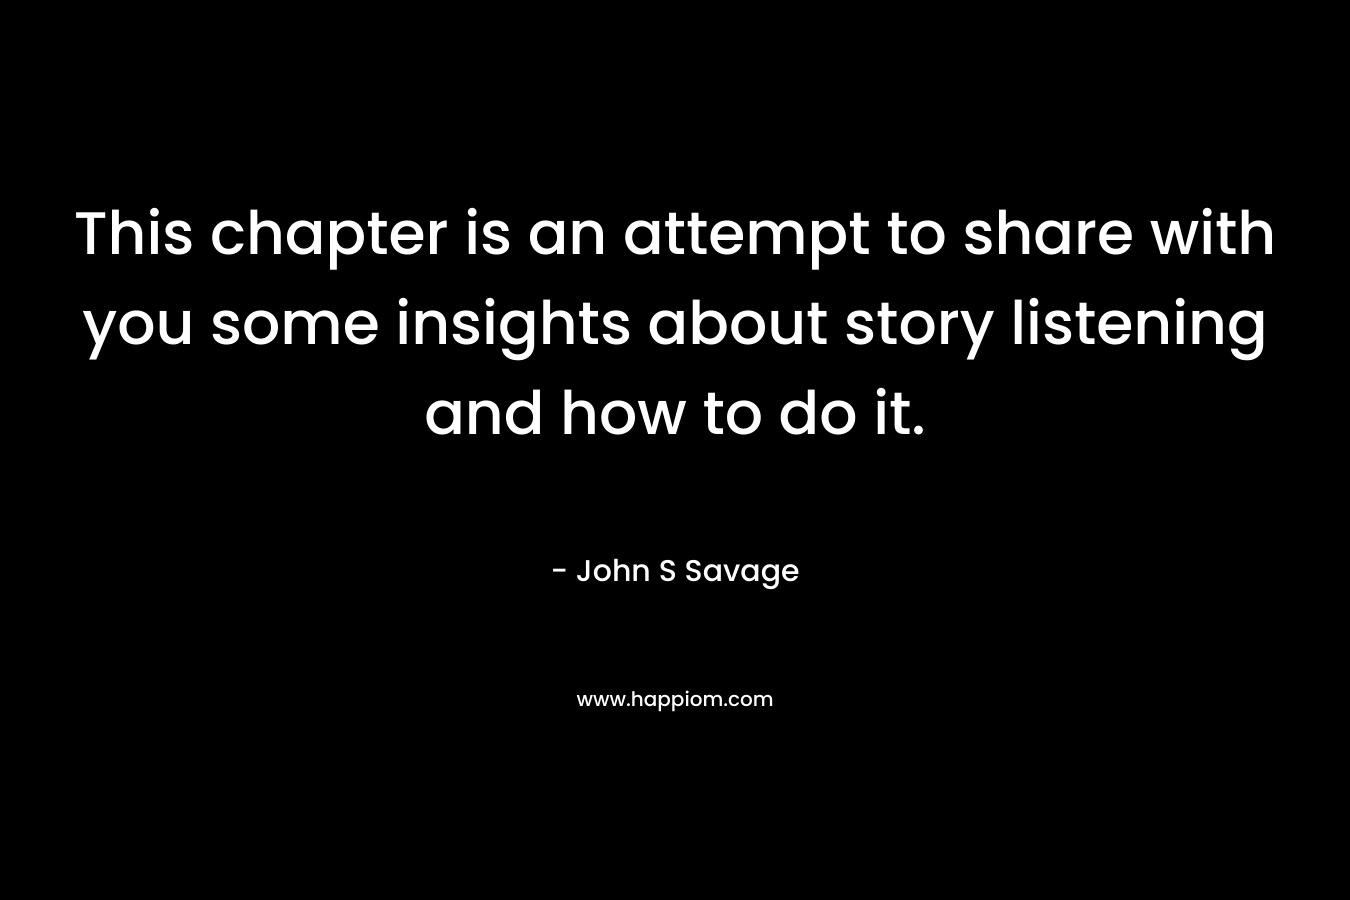 This chapter is an attempt to share with you some insights about story listening and how to do it.